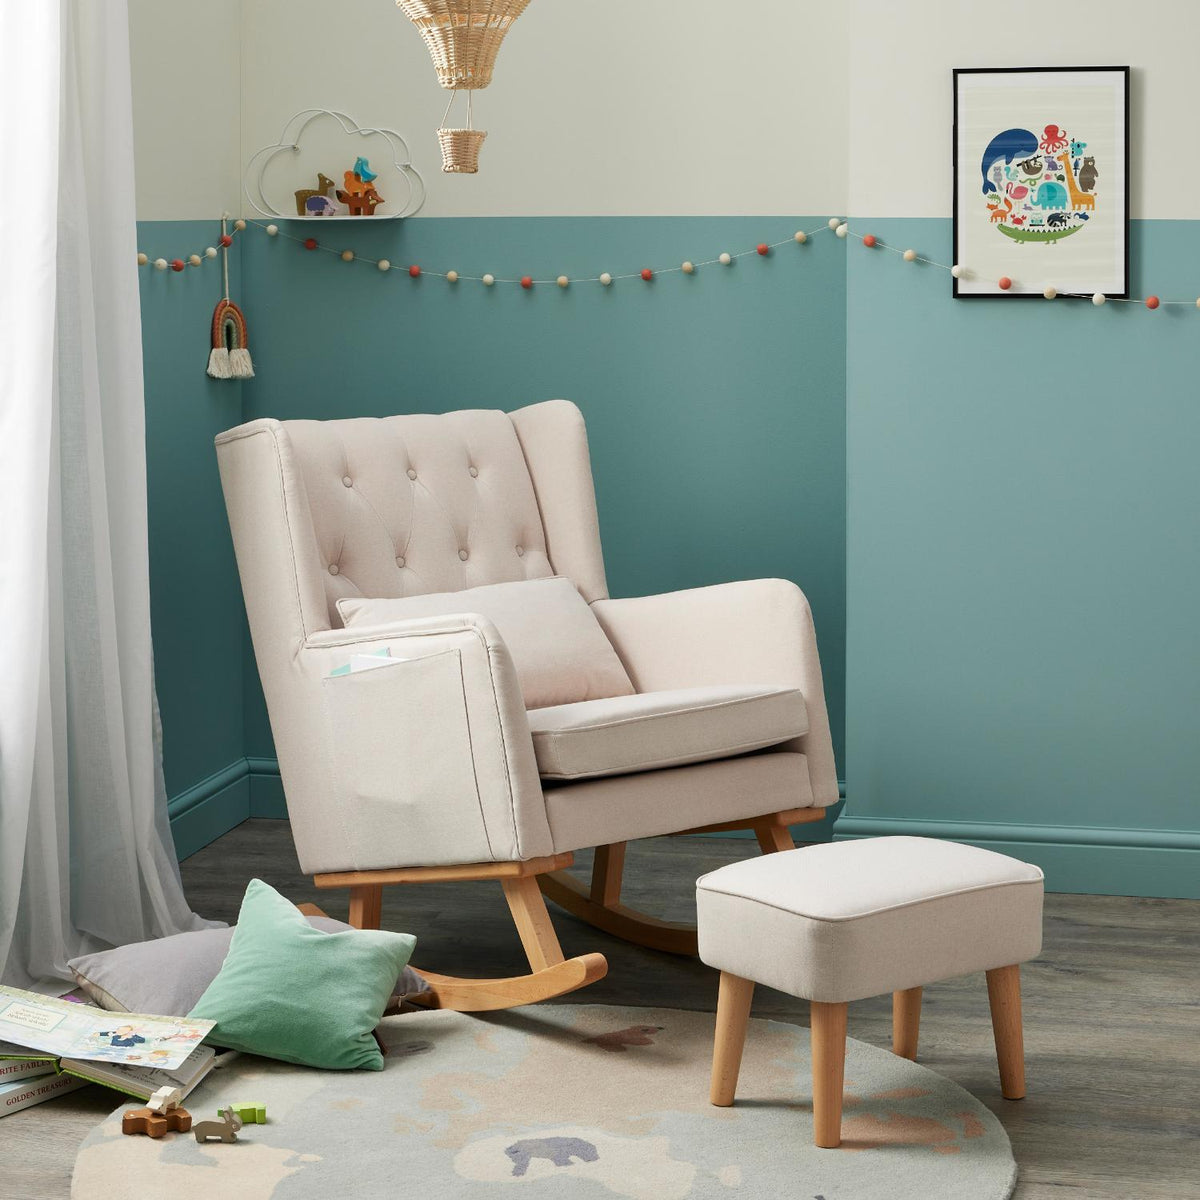 Babymore Lux Nursing Chair with Footstool in Grey colour with rocker wood legs attached